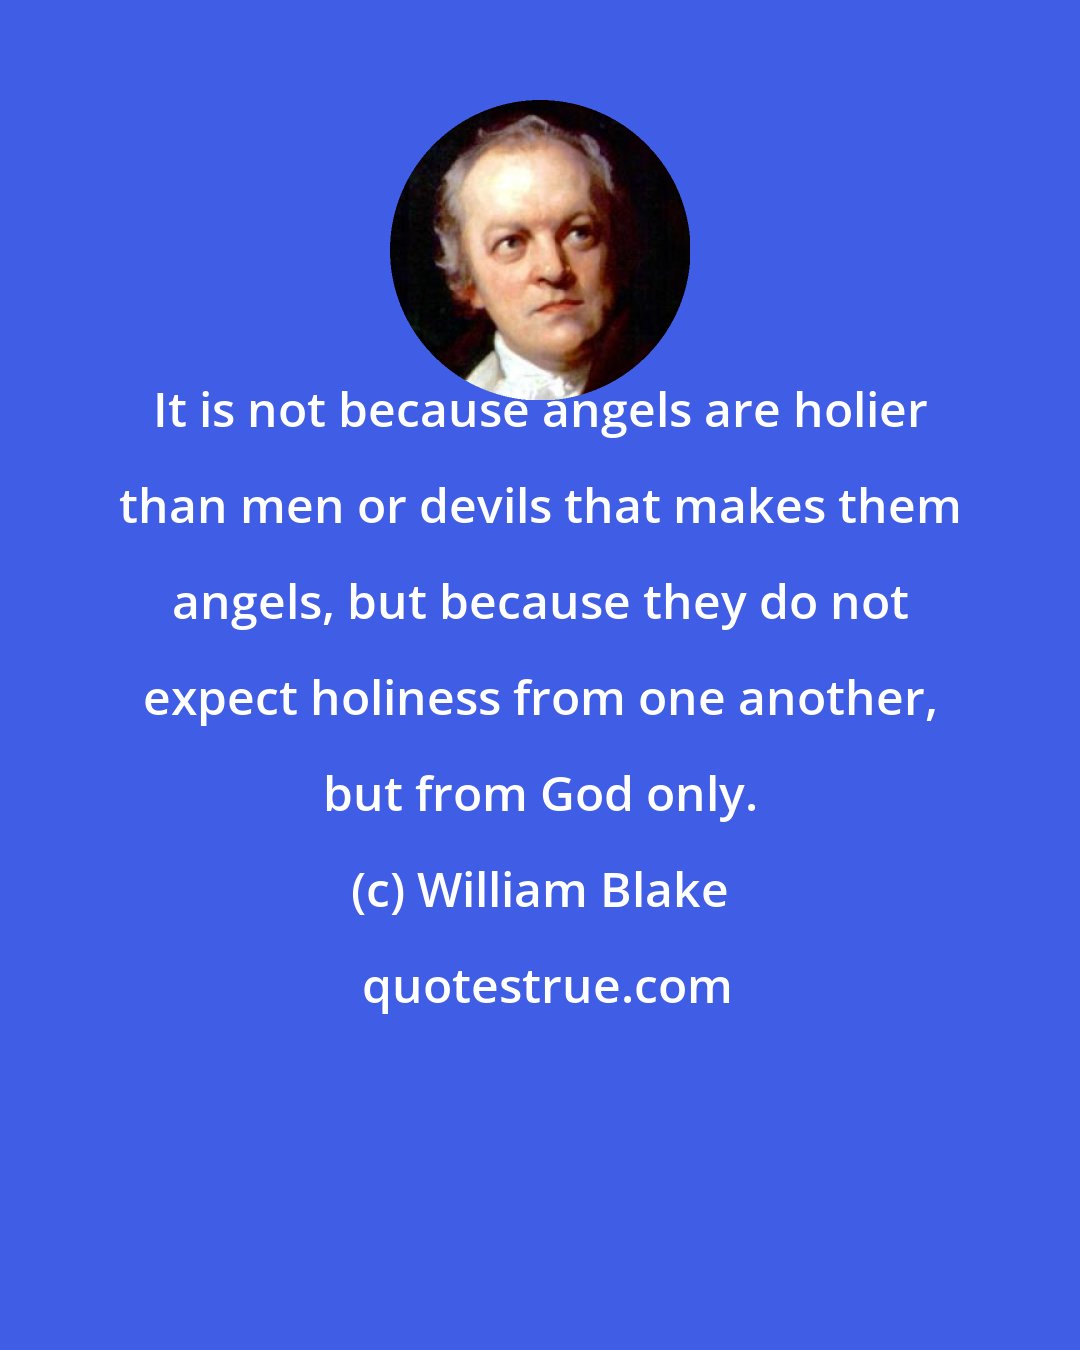 William Blake: It is not because angels are holier than men or devils that makes them angels, but because they do not expect holiness from one another, but from God only.